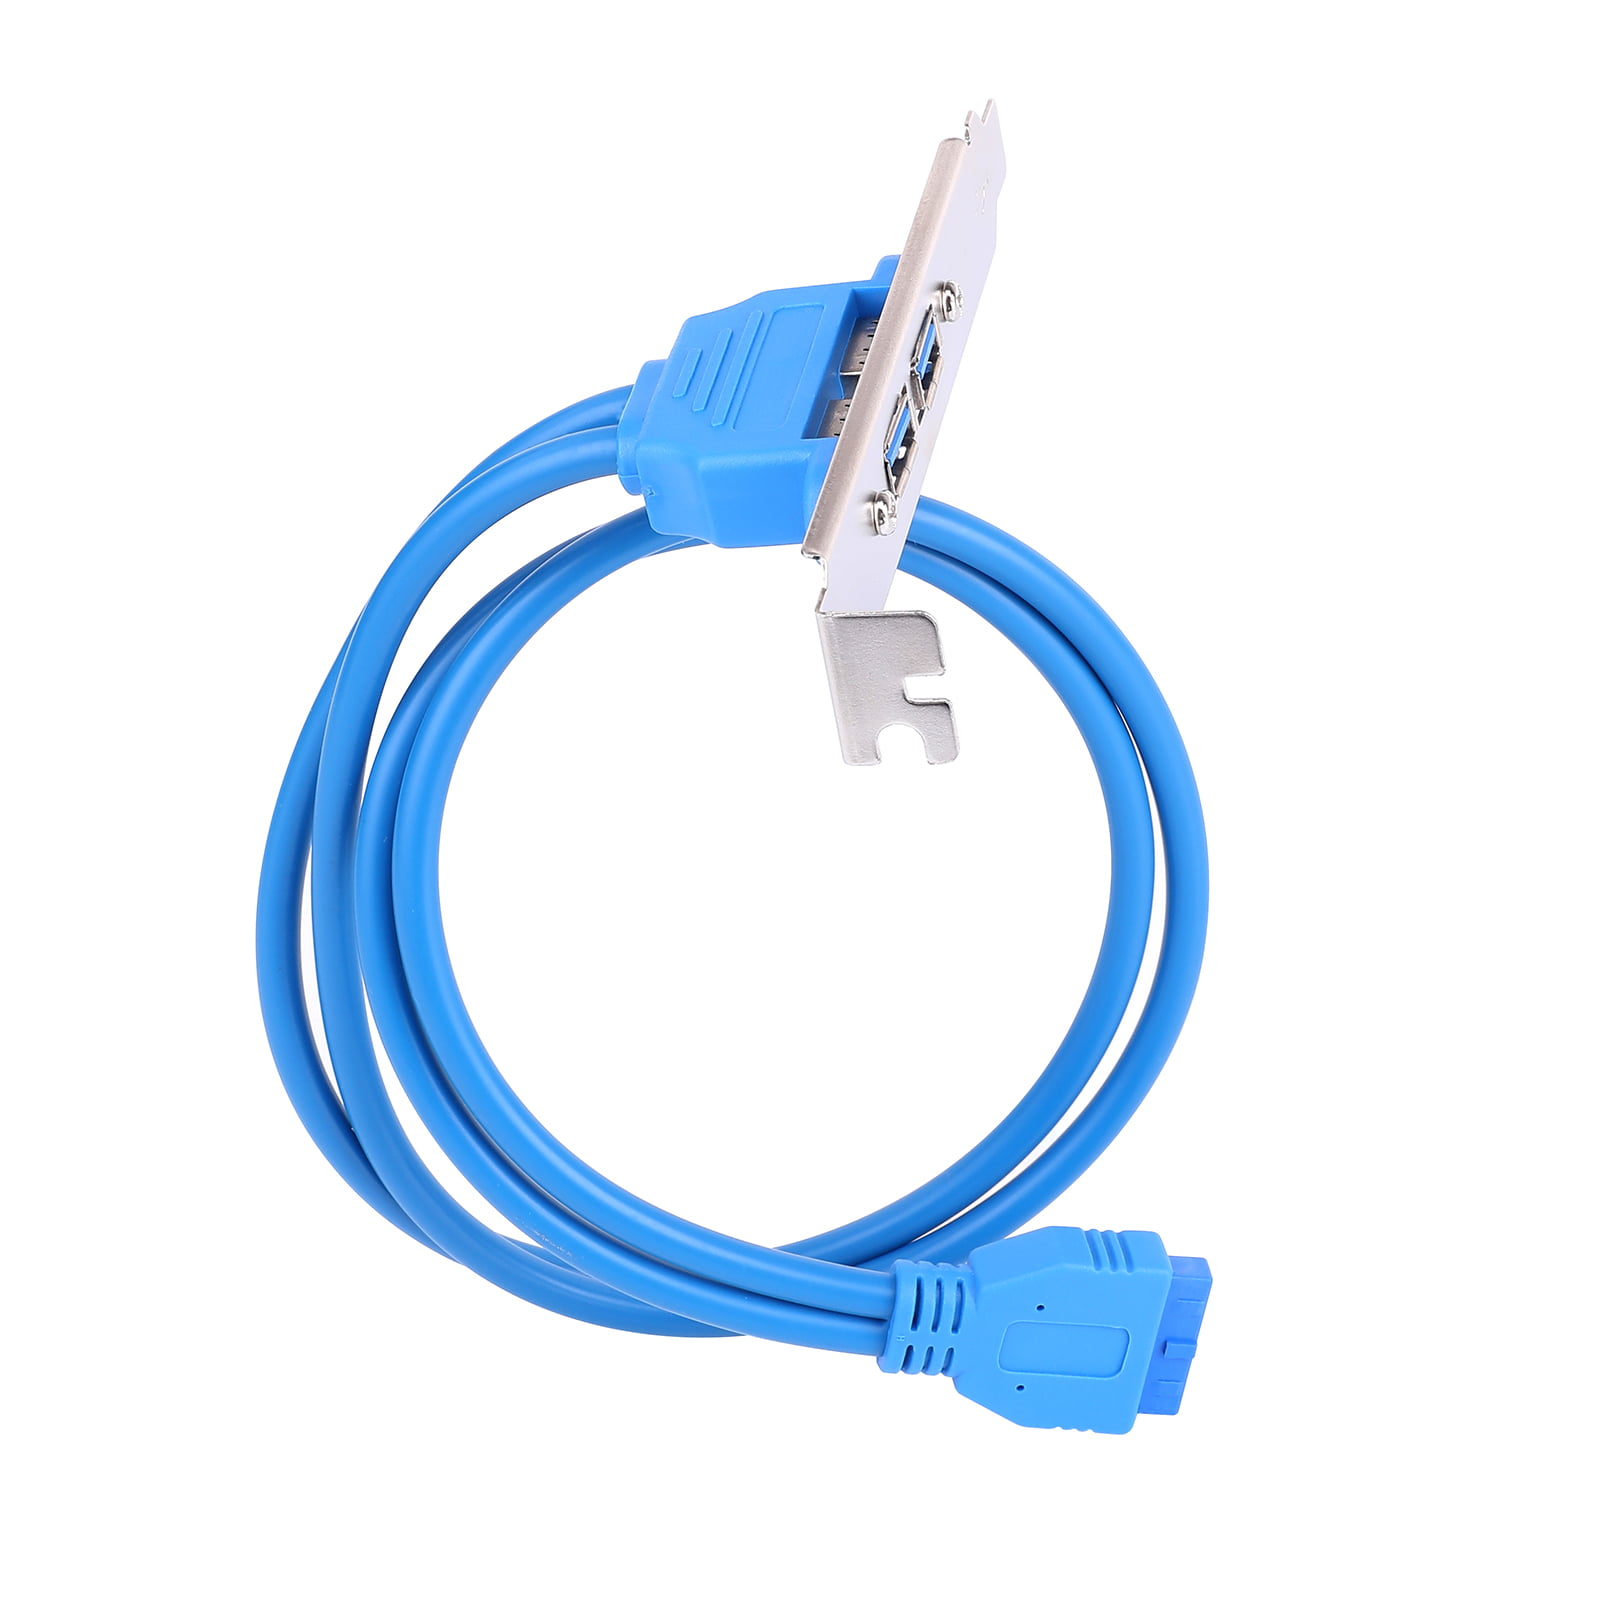 Dual USB 3.0 Type A to 20 Pin Header Cable Super Speed 5Gbp/s Data Sygn Trans... 